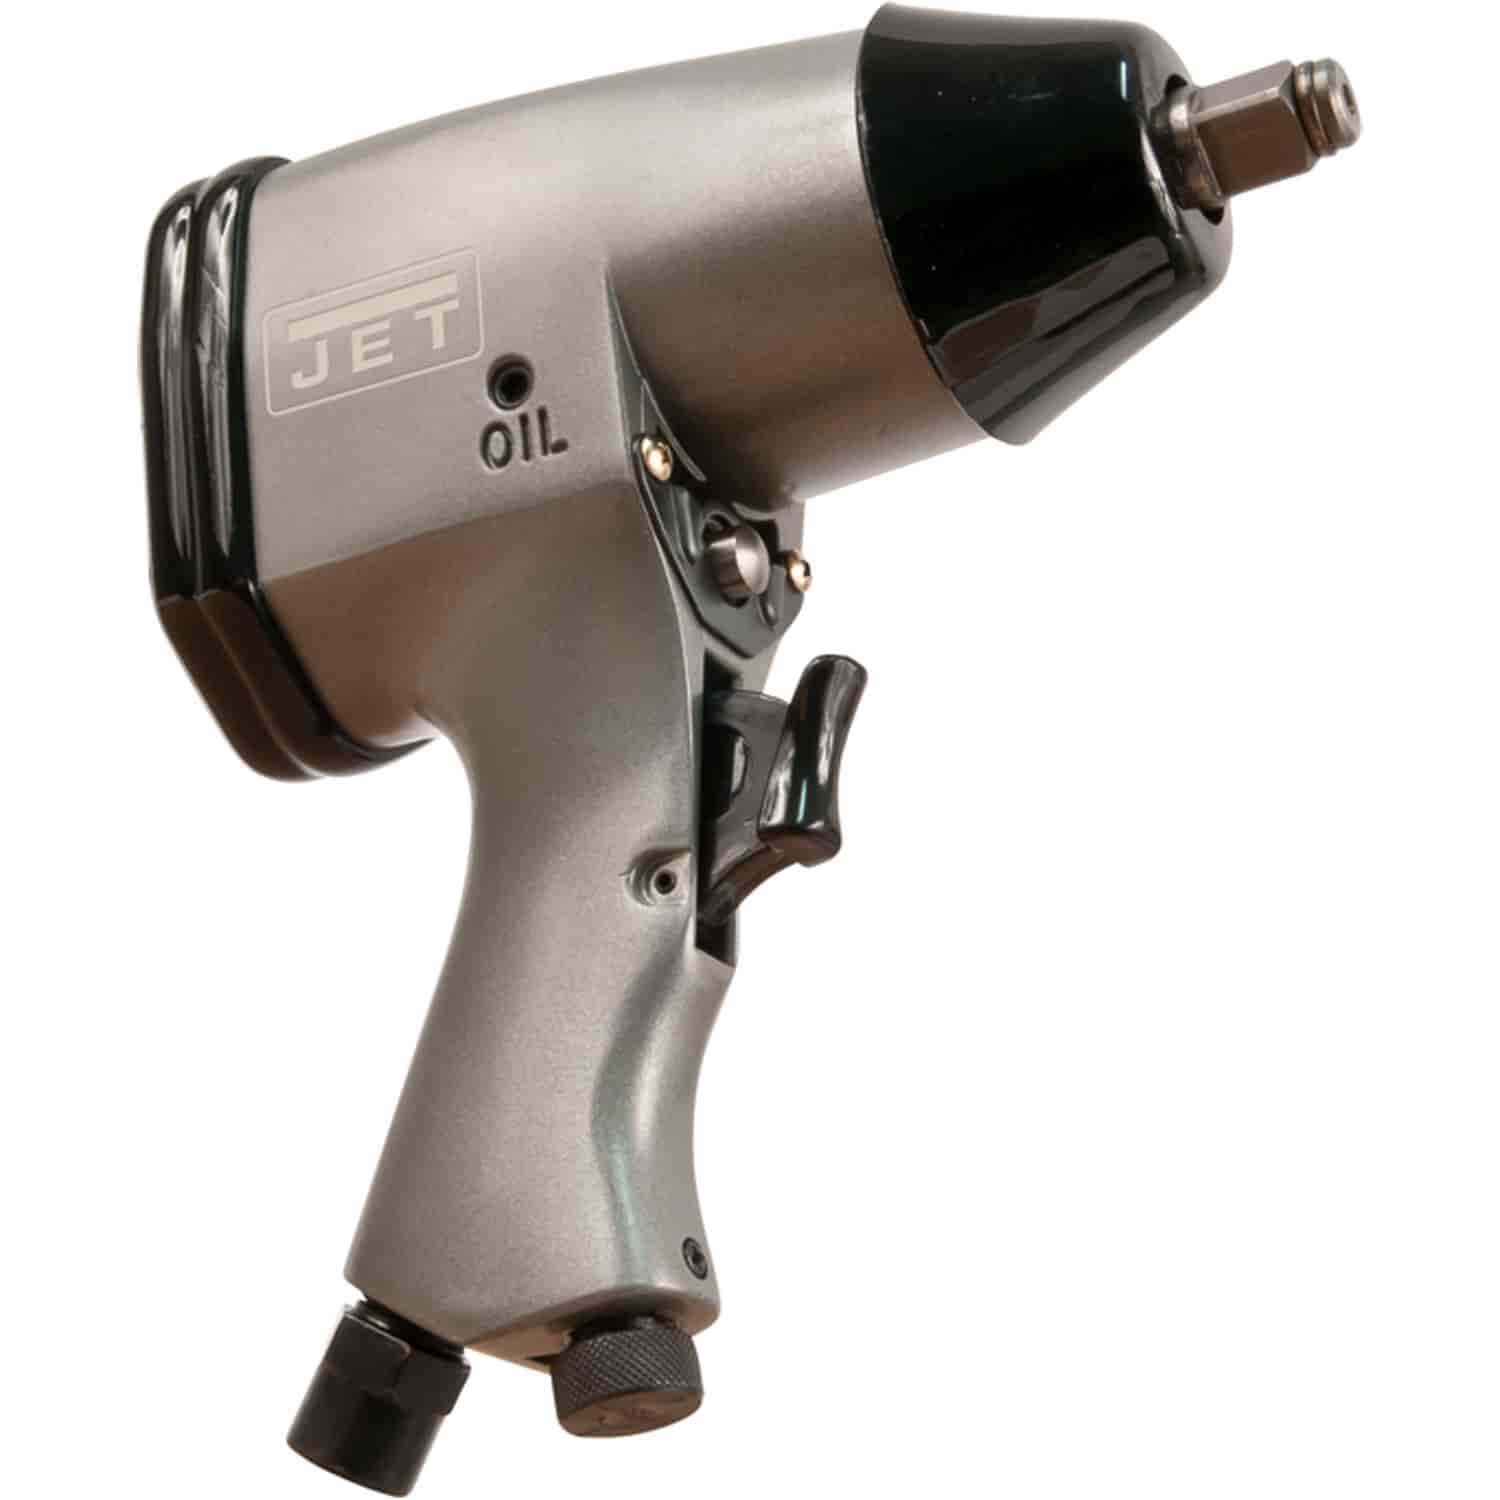 R6 1/2" Air Impact Wrench Square Drive: 1/2"